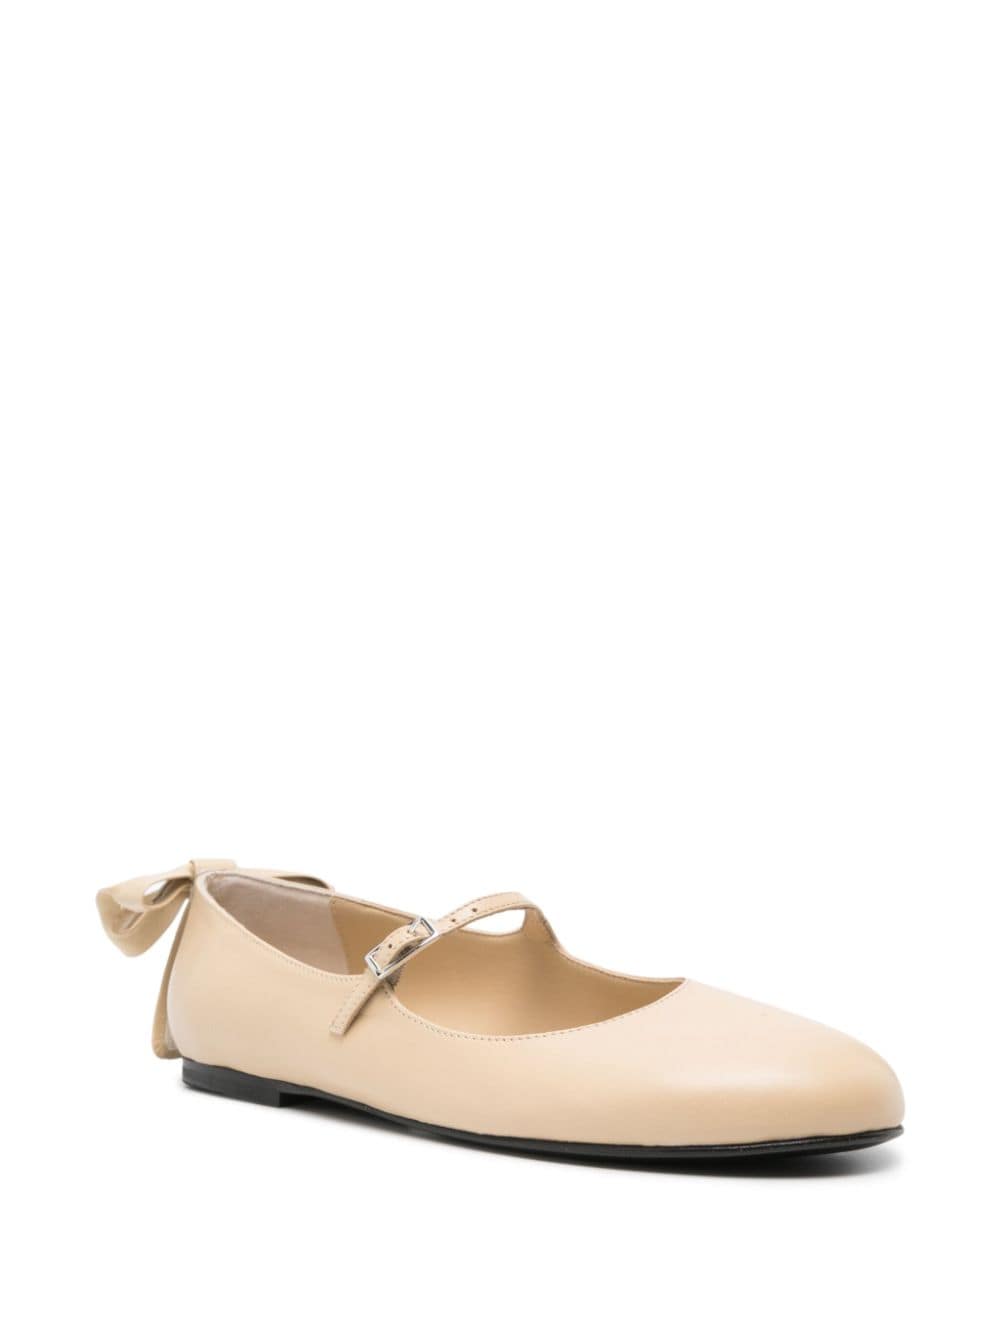 GIABORGHINI bow-detail leather ballerina shoes - Beige